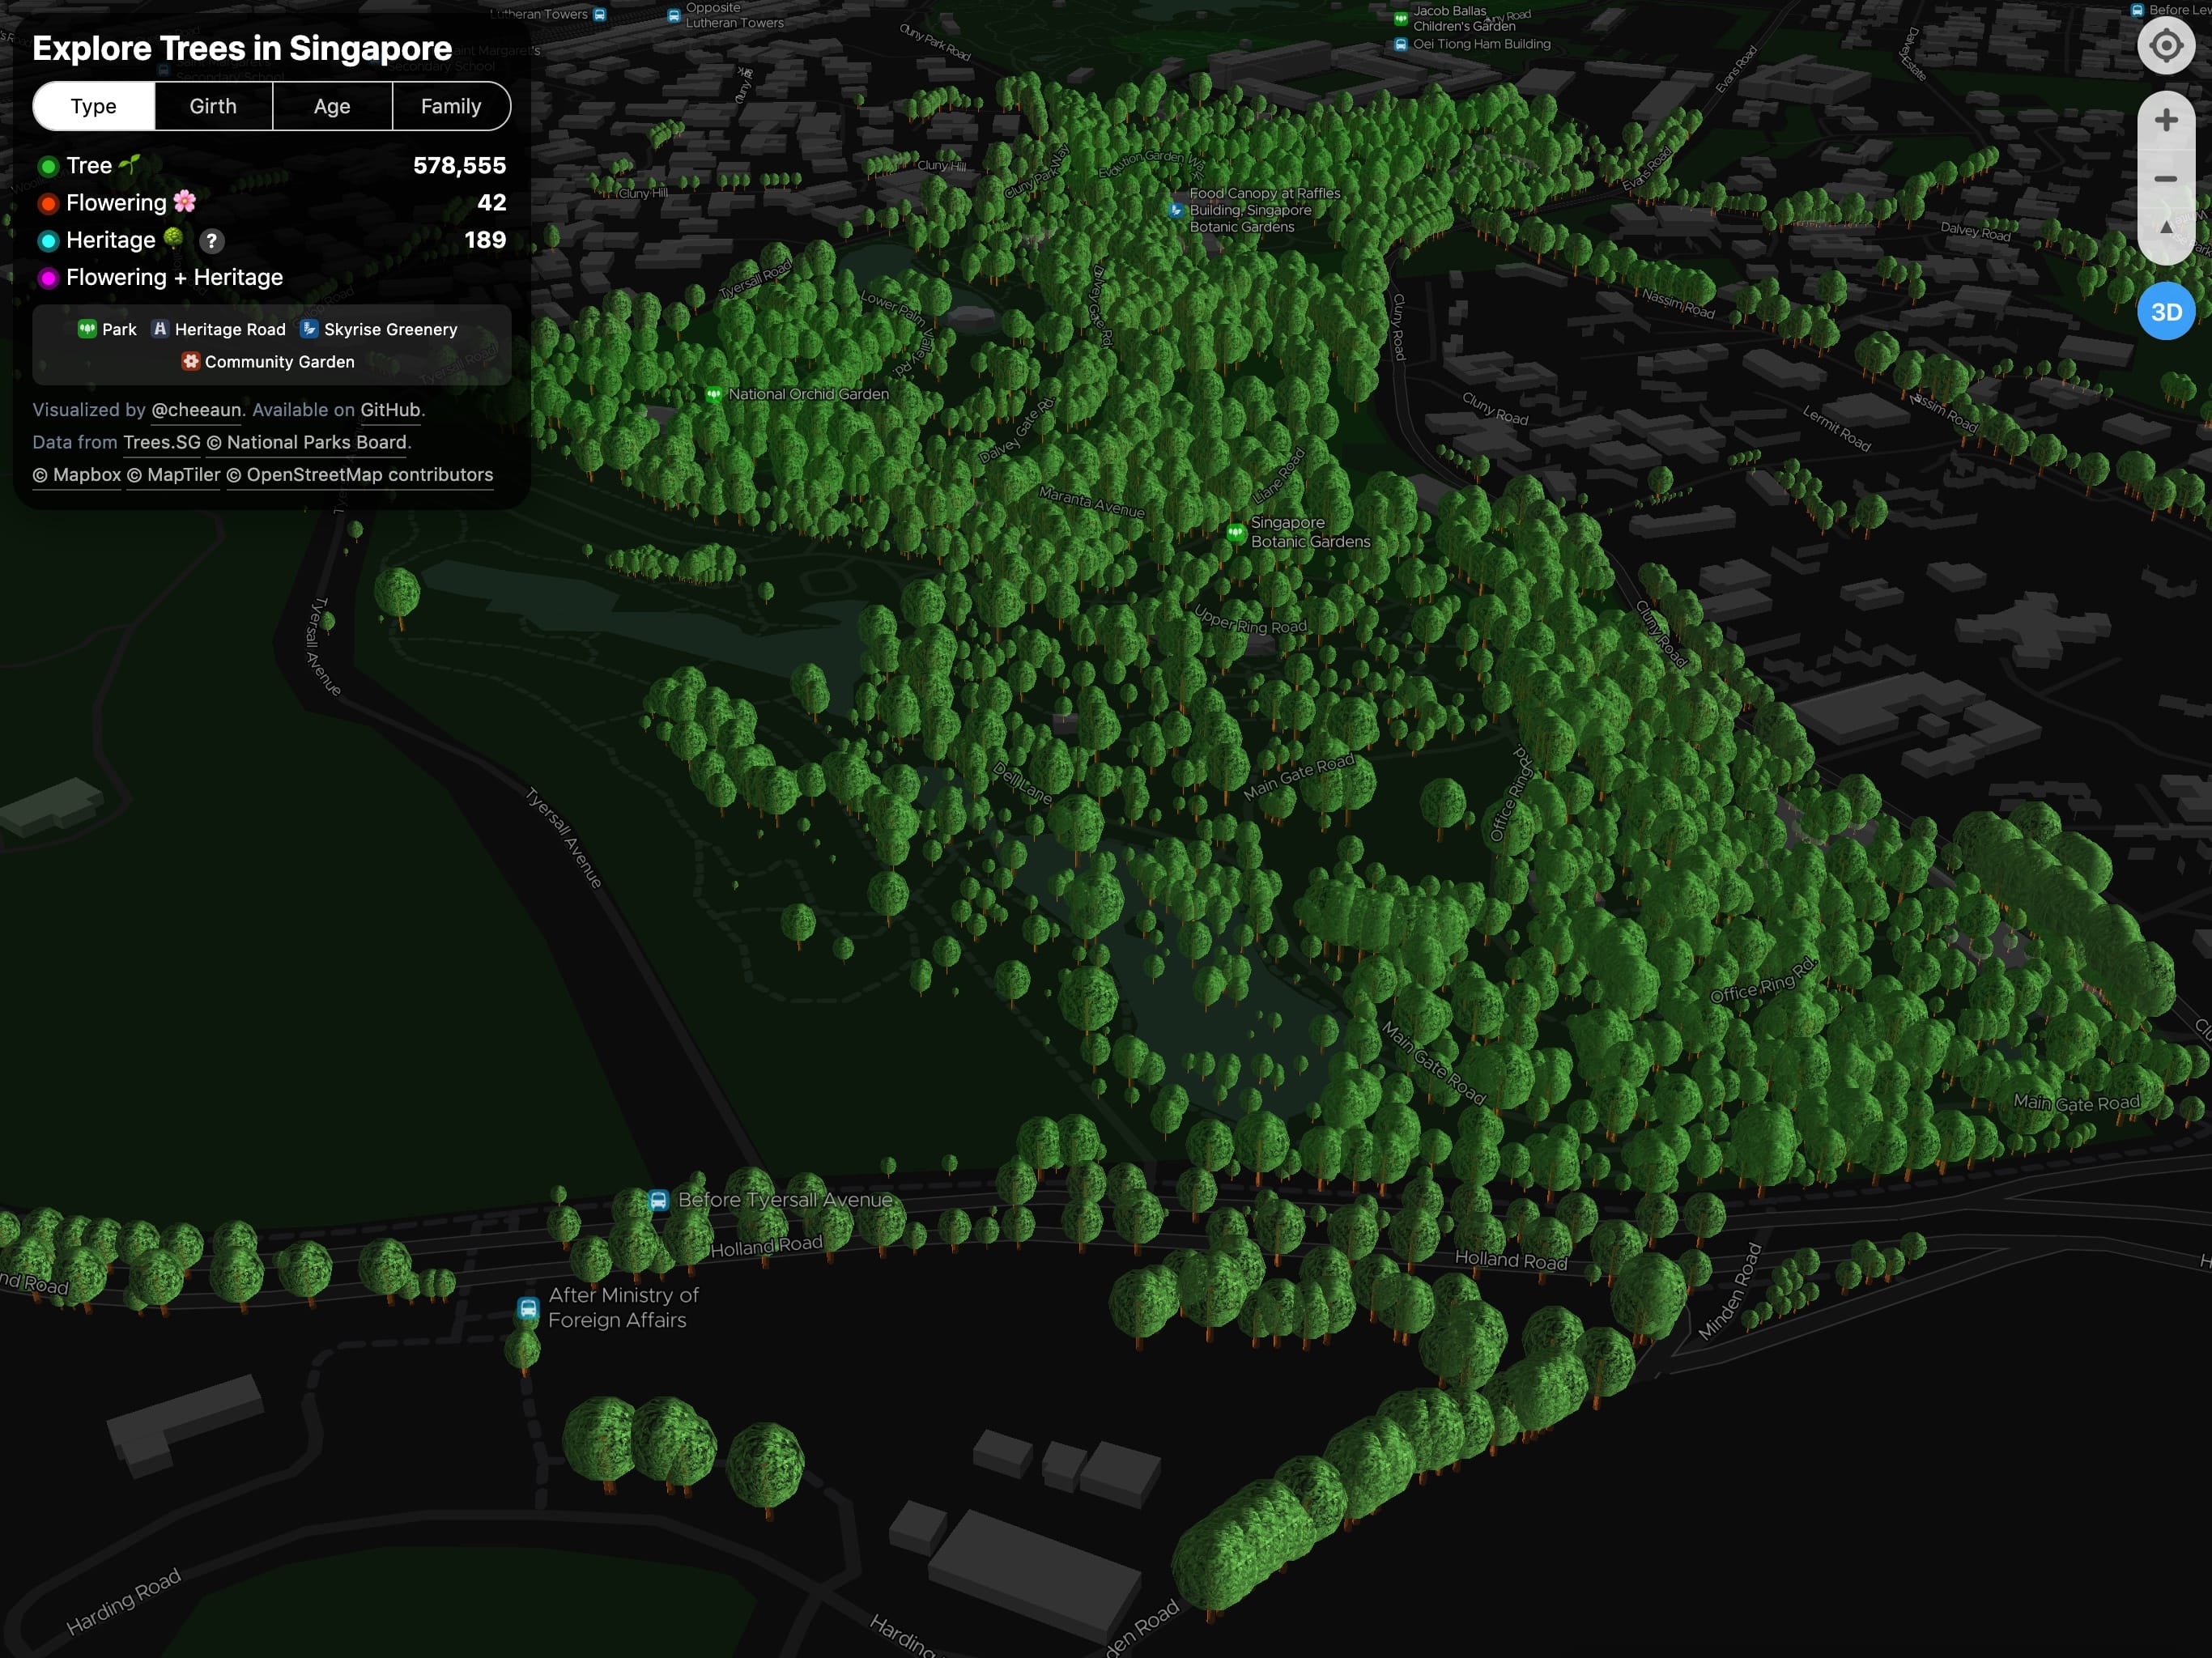 ExploreTrees.SG showing an overview of all 3D trees